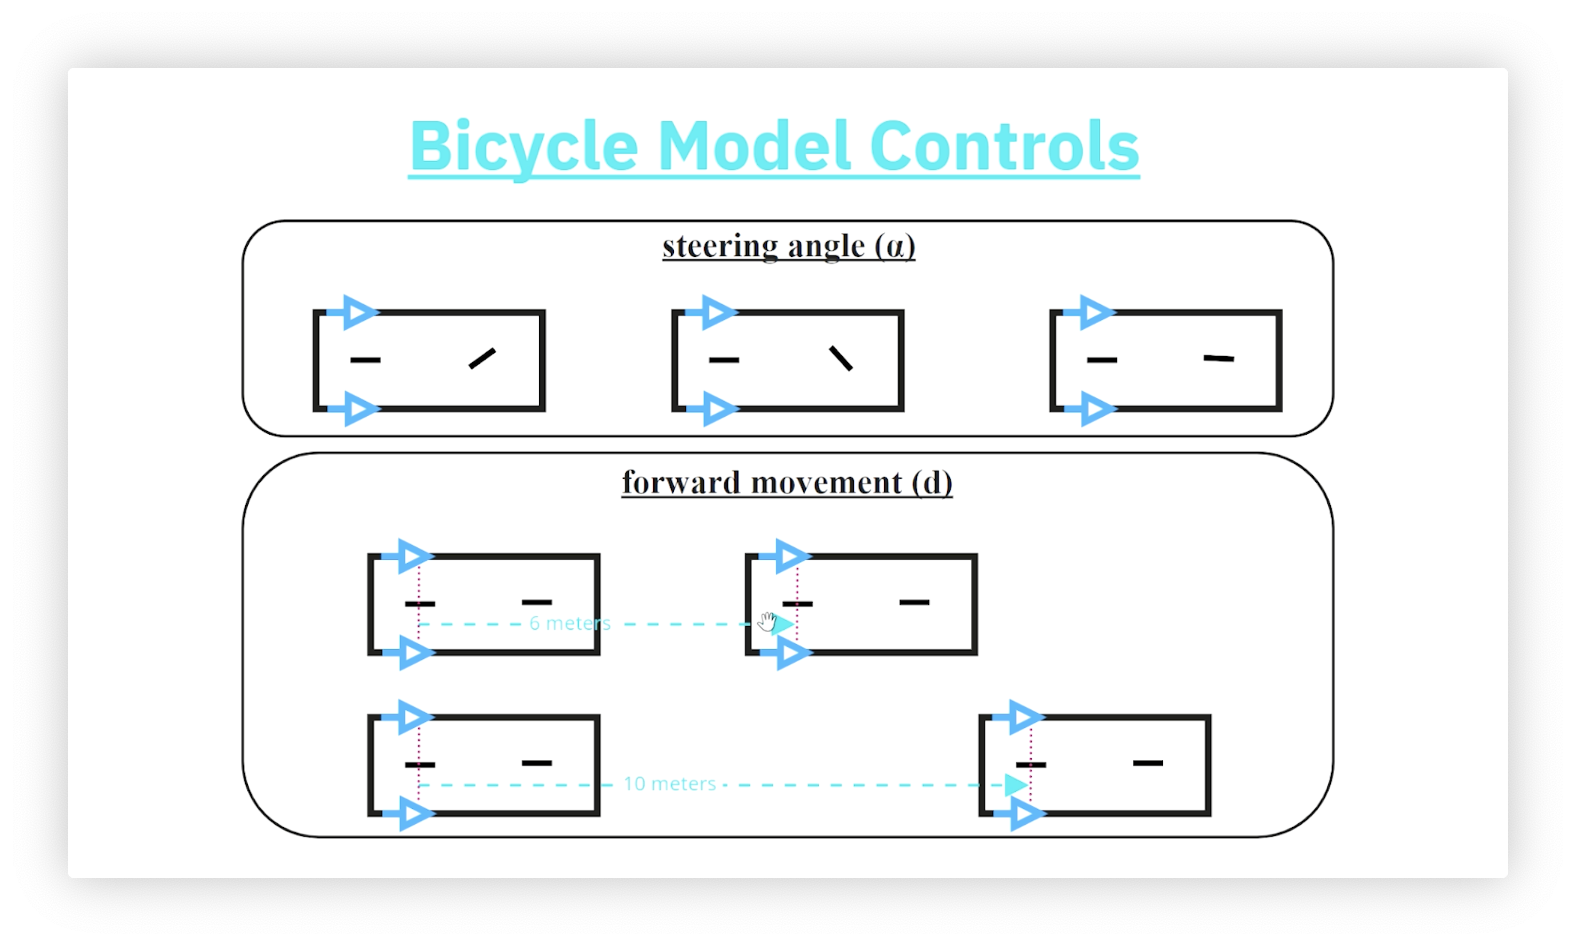 The bicycle model controls: steering angle and forward movement.